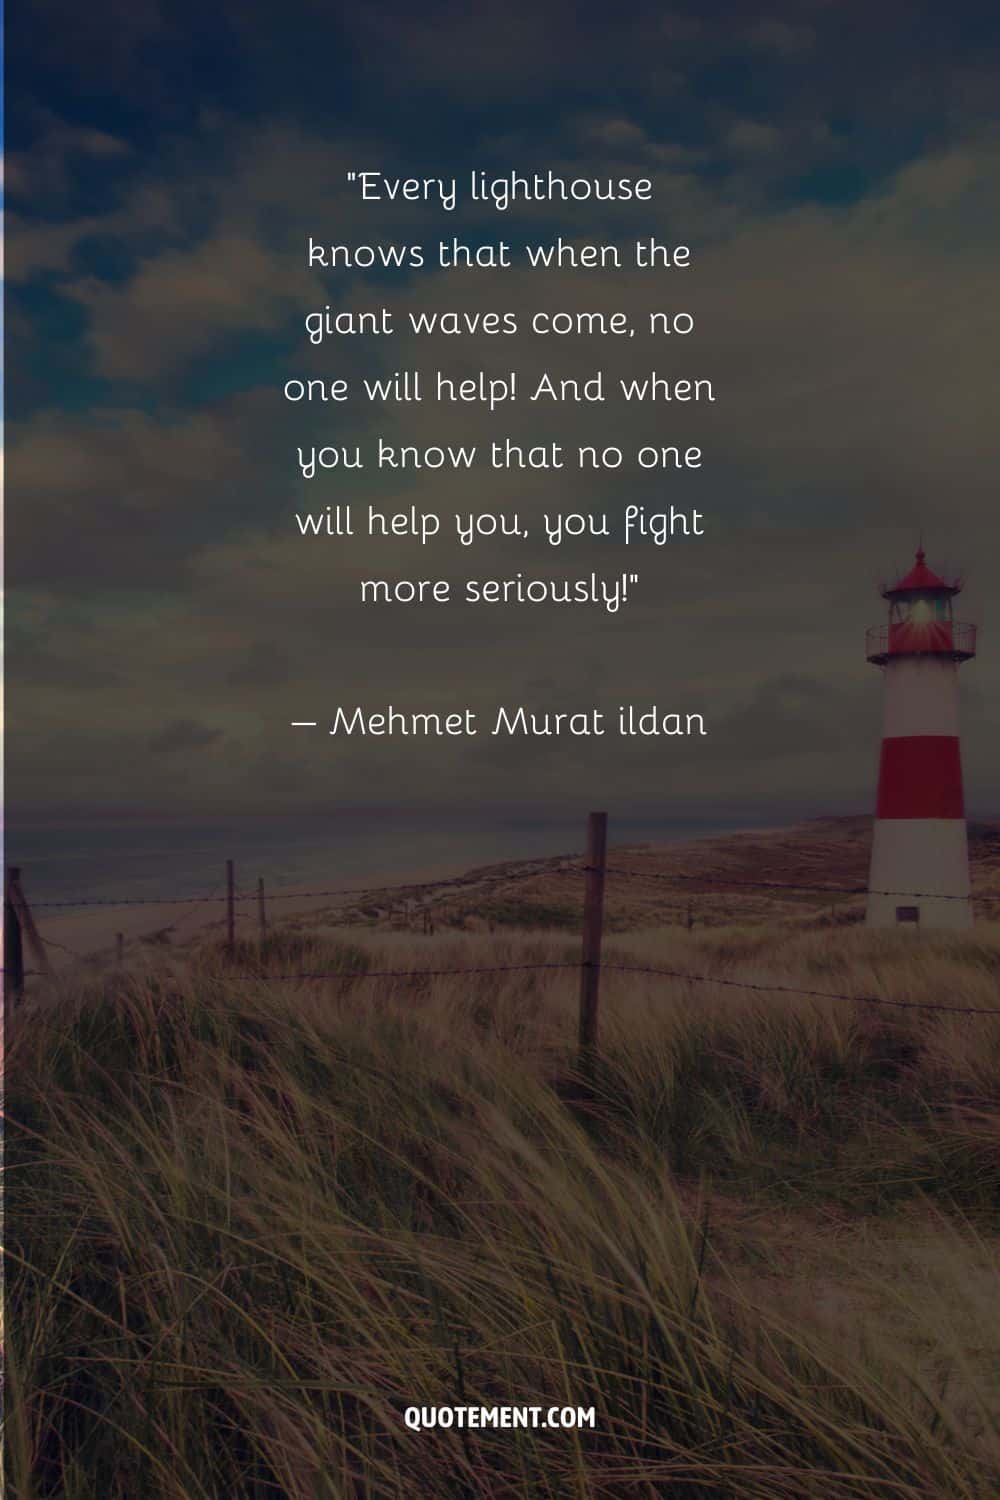 Eye-opening and motivational quote by Mehmet Murat ildan and a lighthouse in the background